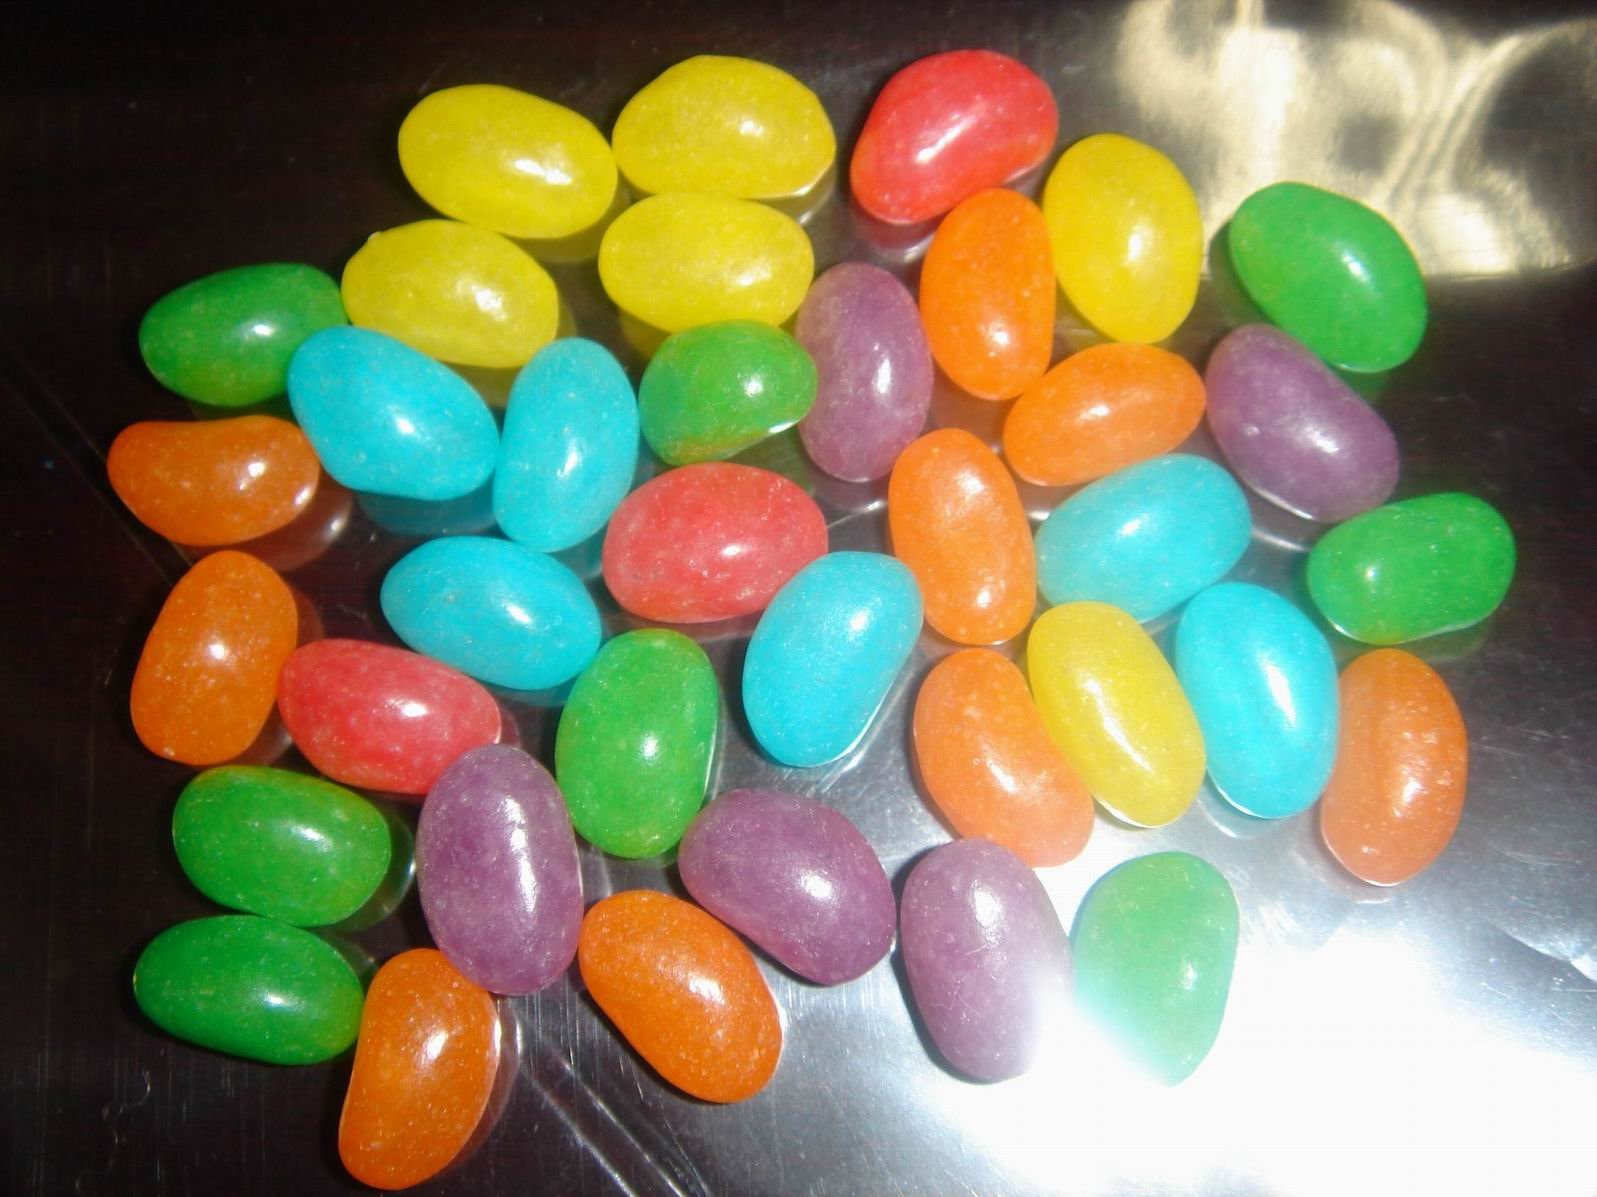 soft fruit candy(jelly beans)